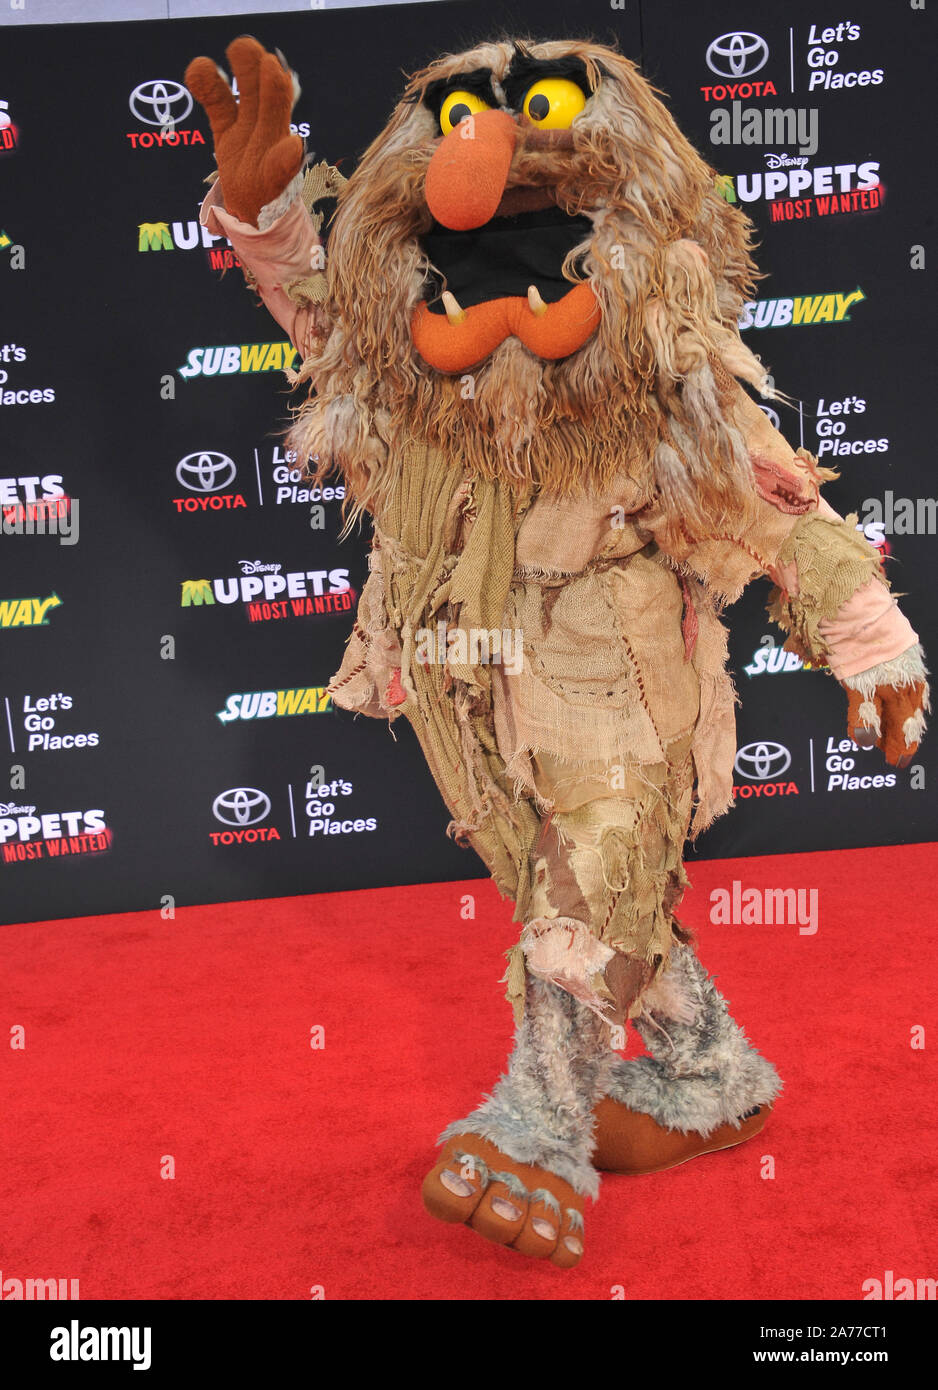 LOS ANGELES, CA - MARCH 11, 2014: Muppets' character Sweetums at the world premiere of her movie Disney's 'Muppets Most Wanted' at the El Capitan Theatre, Hollywood. © 2014 Paul Smith / Featureflash Stock Photo